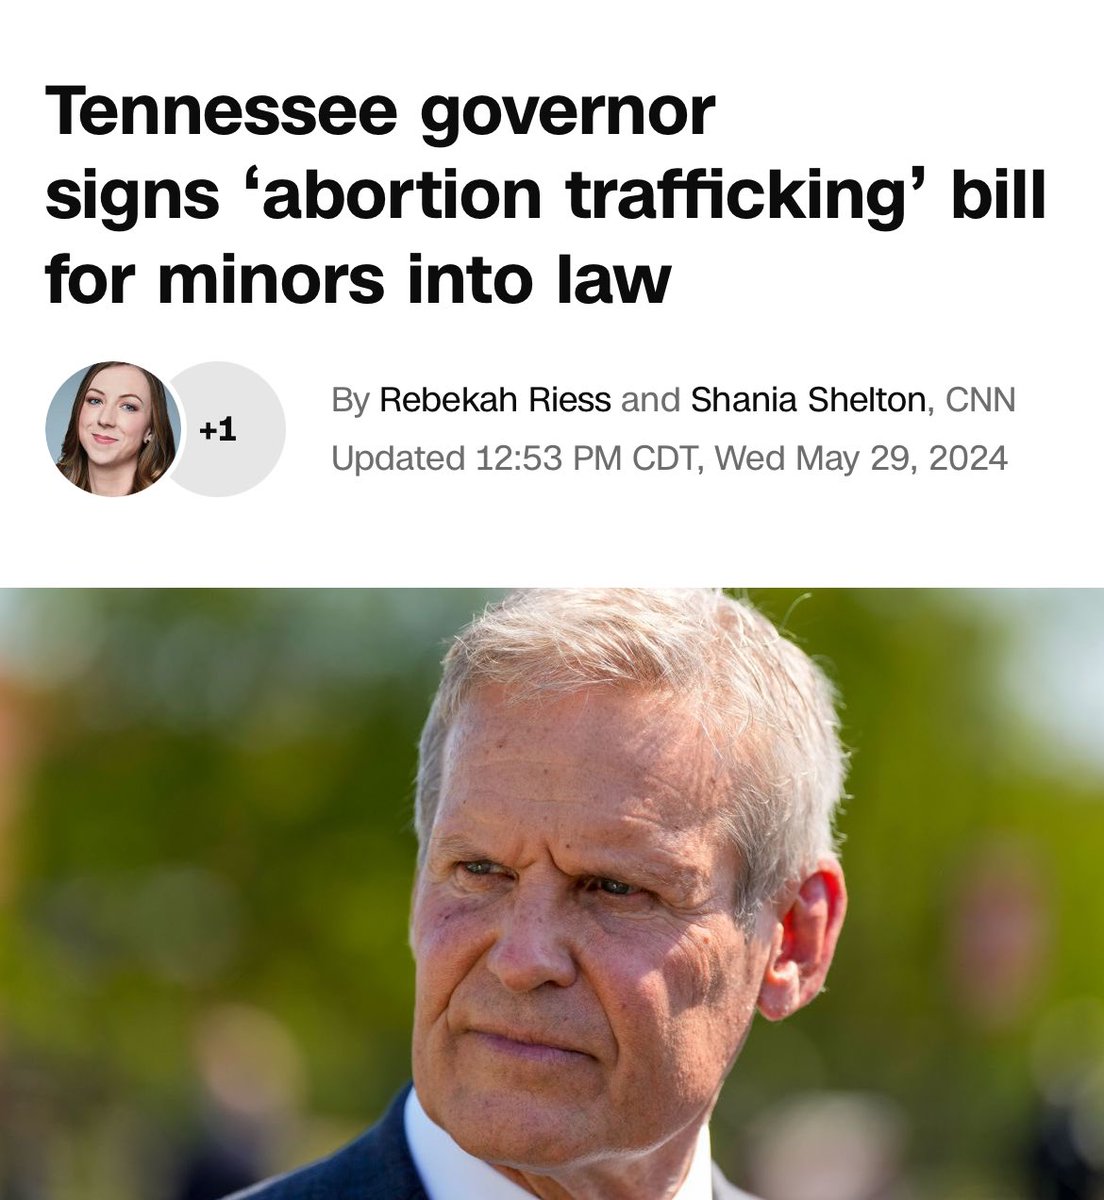 The @TNGOP is taking away our freedom to control our lives.

Every year after Republicans enacted the nation’s most extreme abortion ban, they’ve made the law worse: first, criminalizing doctors, now trusted adults. Birth control & pregnant women are next.
cnn.com/2024/05/29/pol…